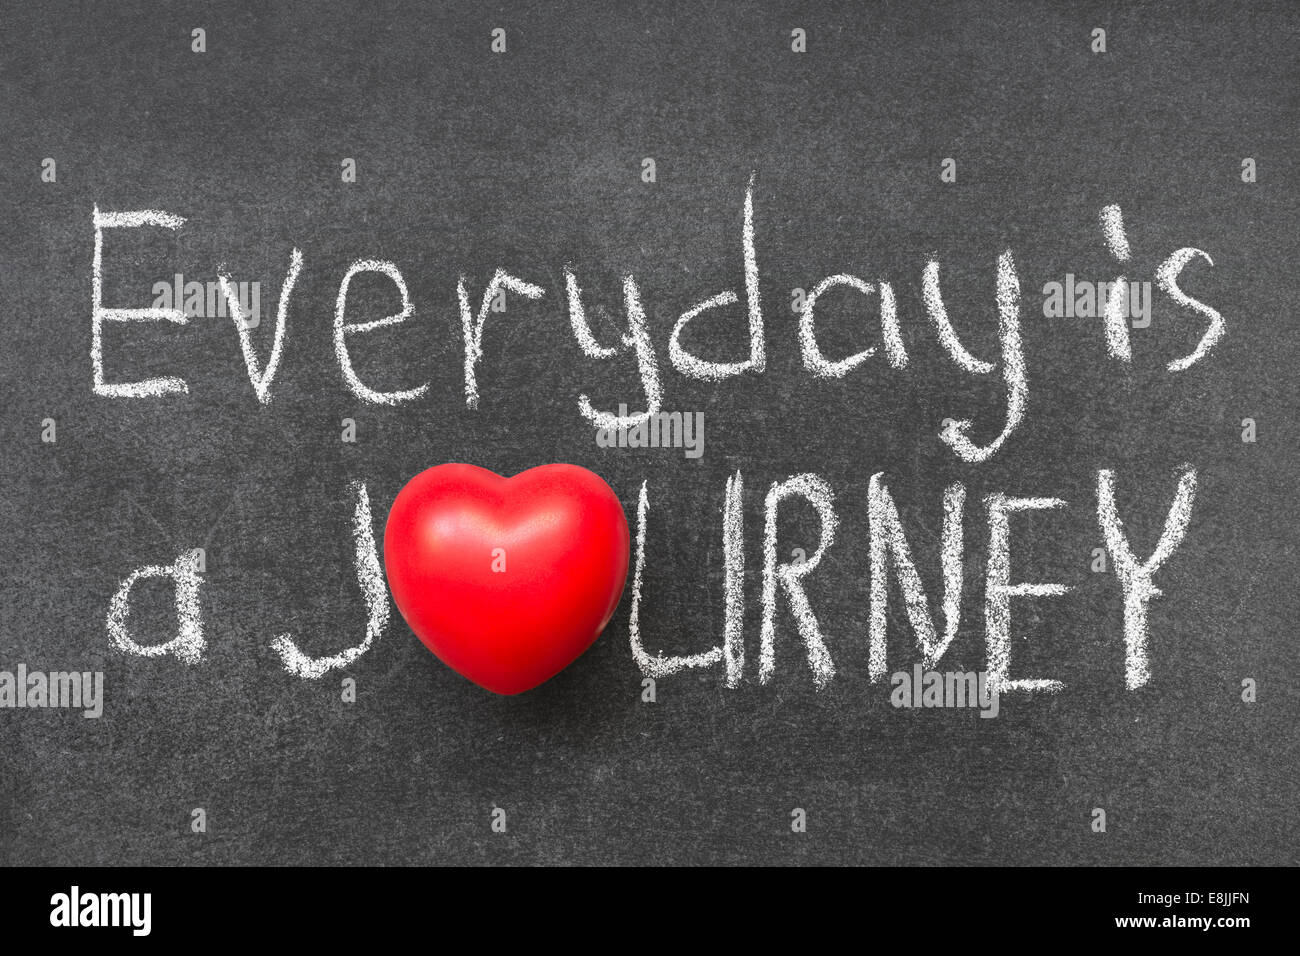 everyday is a journey phrase handwritten on chalkboard with heart symbol instead of O Stock Photo